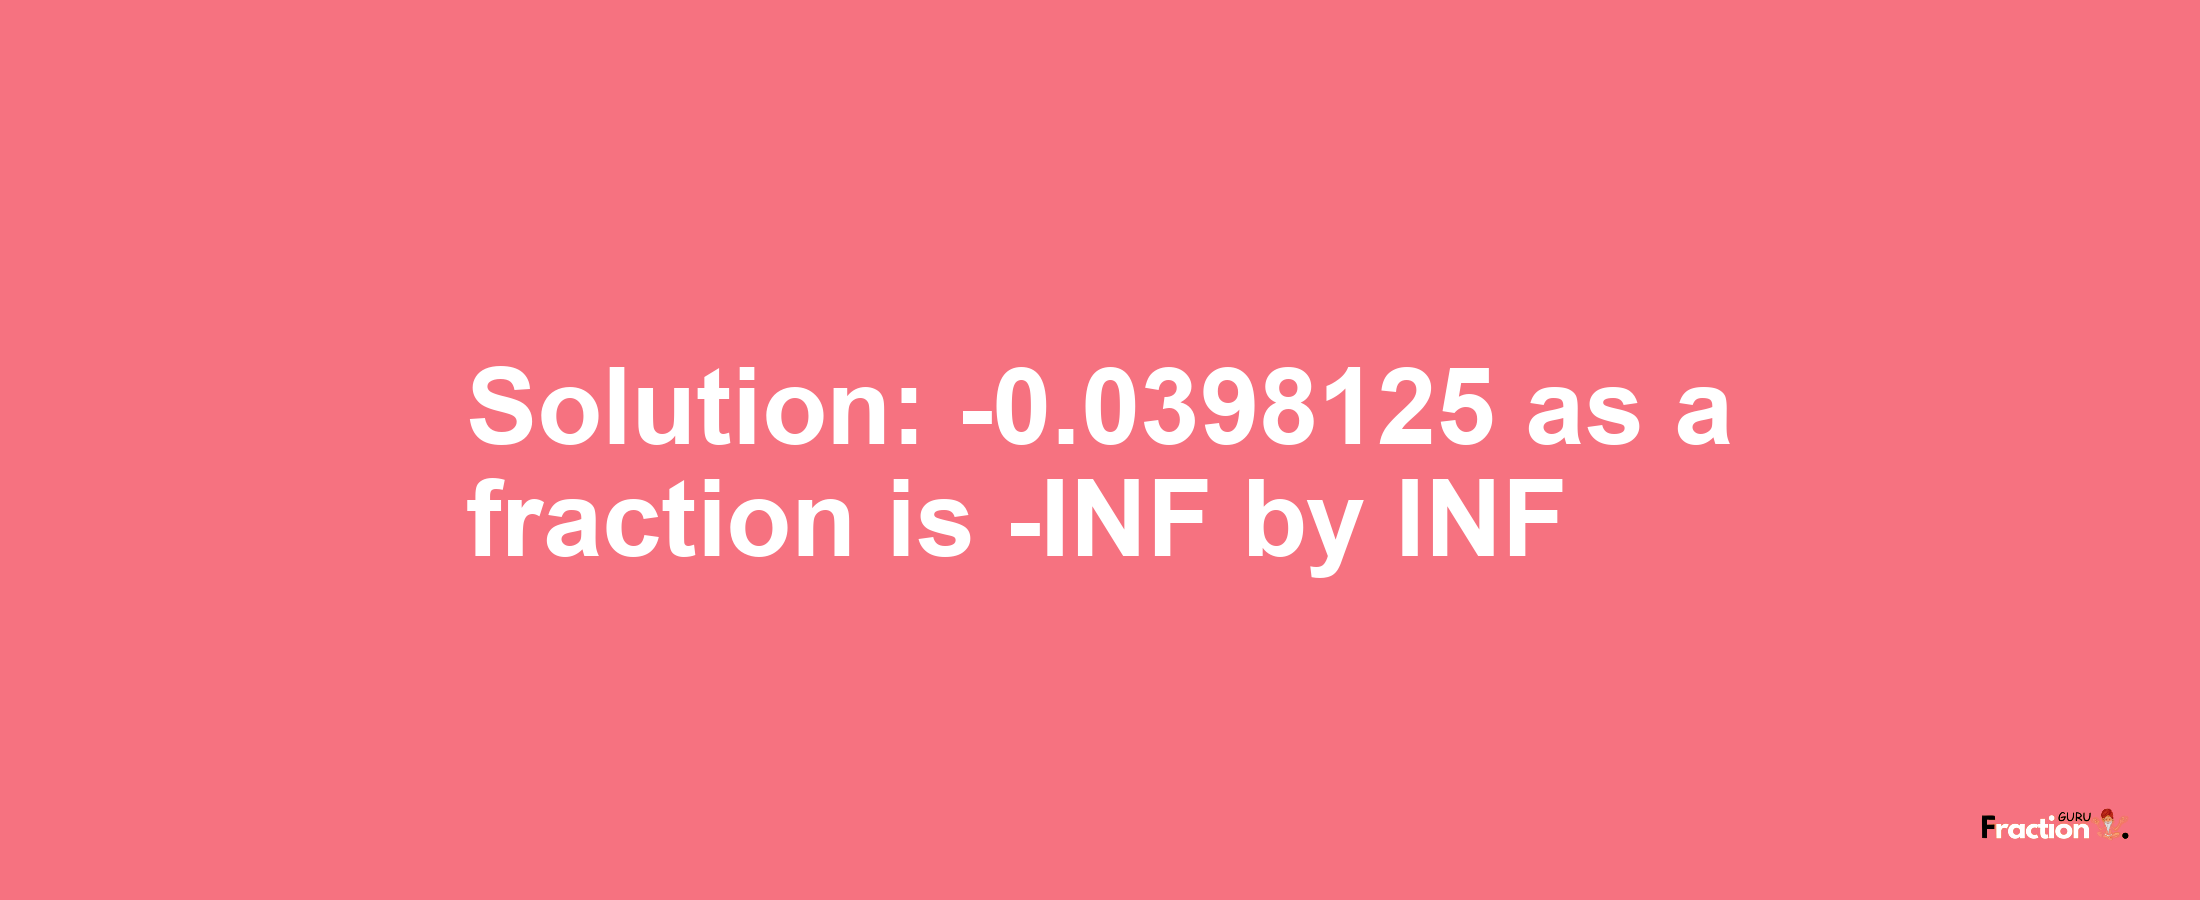 Solution:-0.0398125 as a fraction is -INF/INF